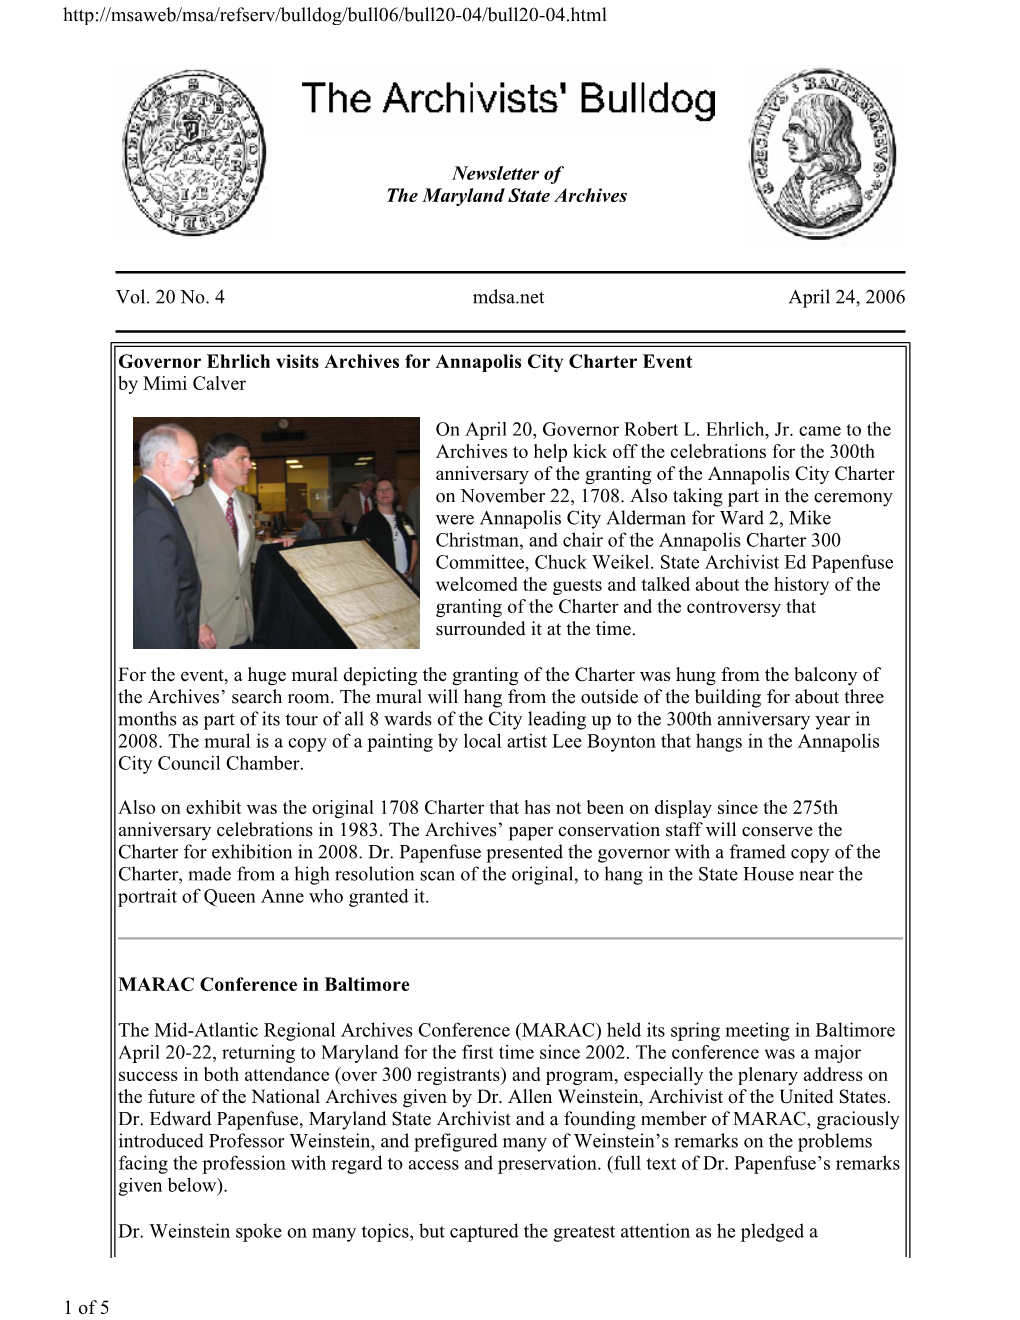 Newsletter of the Maryland State Archives Vol. 20 No. 4 Mdsa.Net